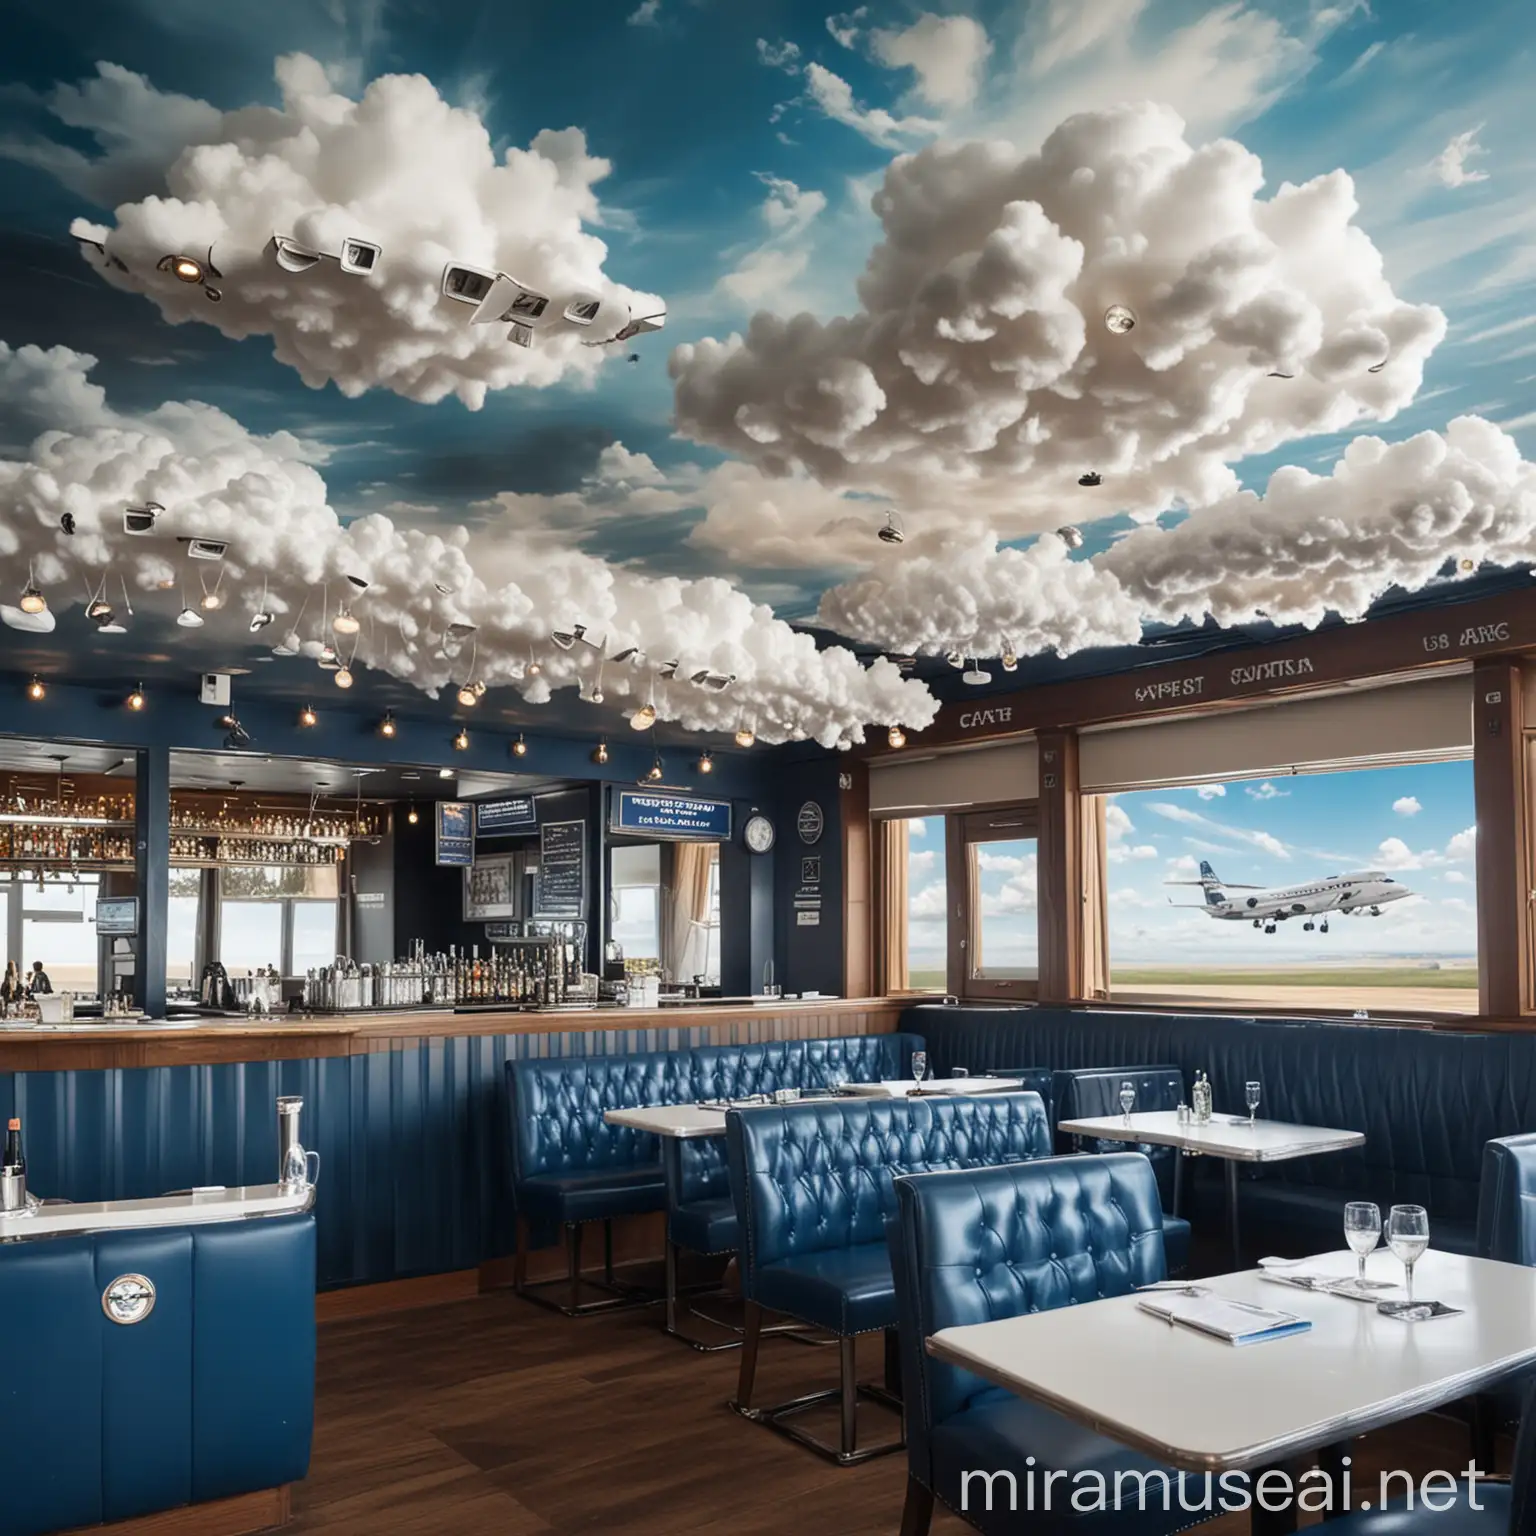 AviationThemed Cafe with Cloud Chandeliers and Flight Attendant Waiters